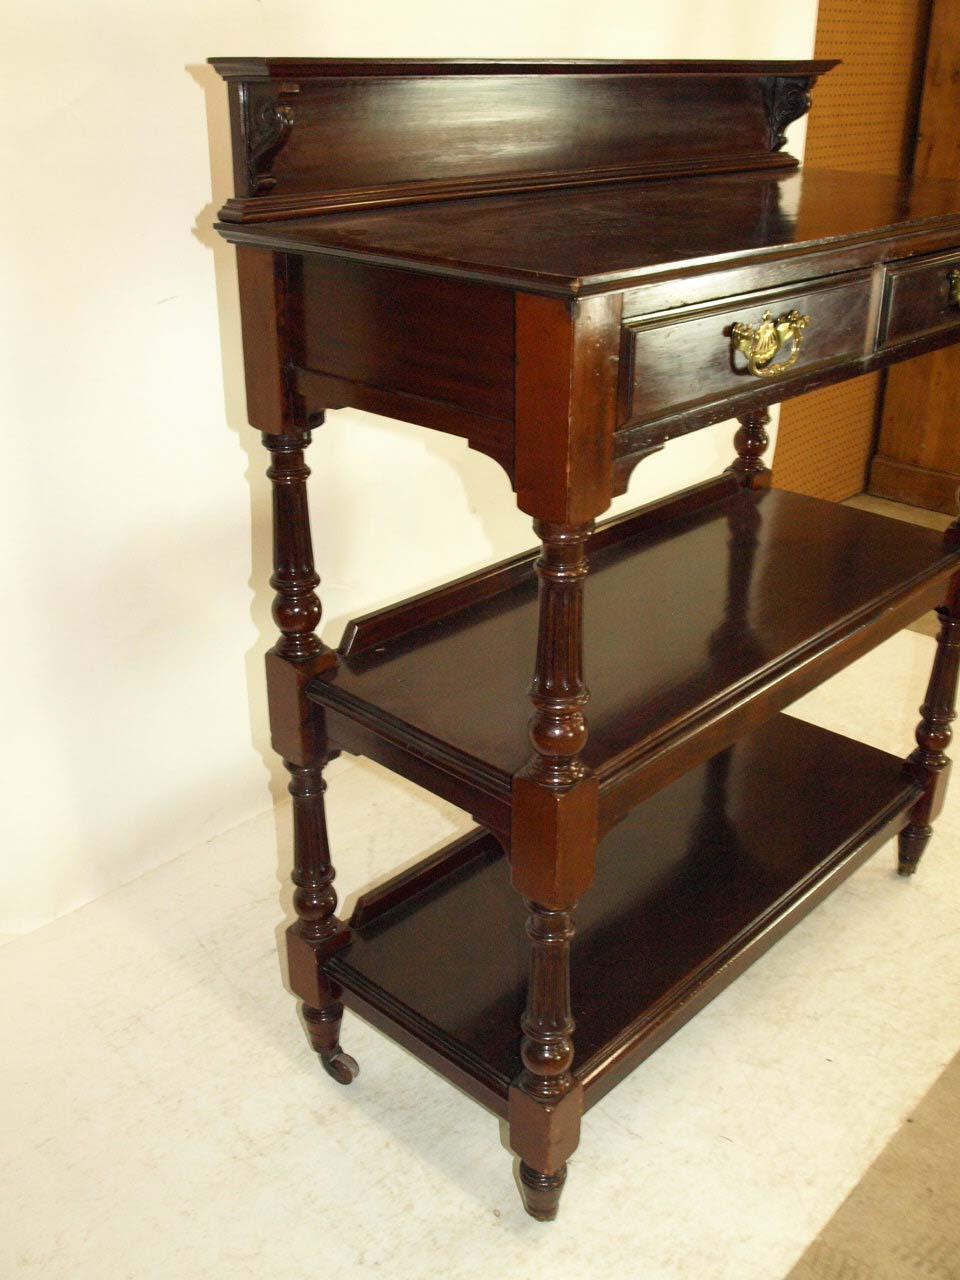 English mahogany serving trolley, the gallery with carved supports, two drawers with original brass pulls, two lower shelves, resting on brass and brown porcelain castors, circa 1890.